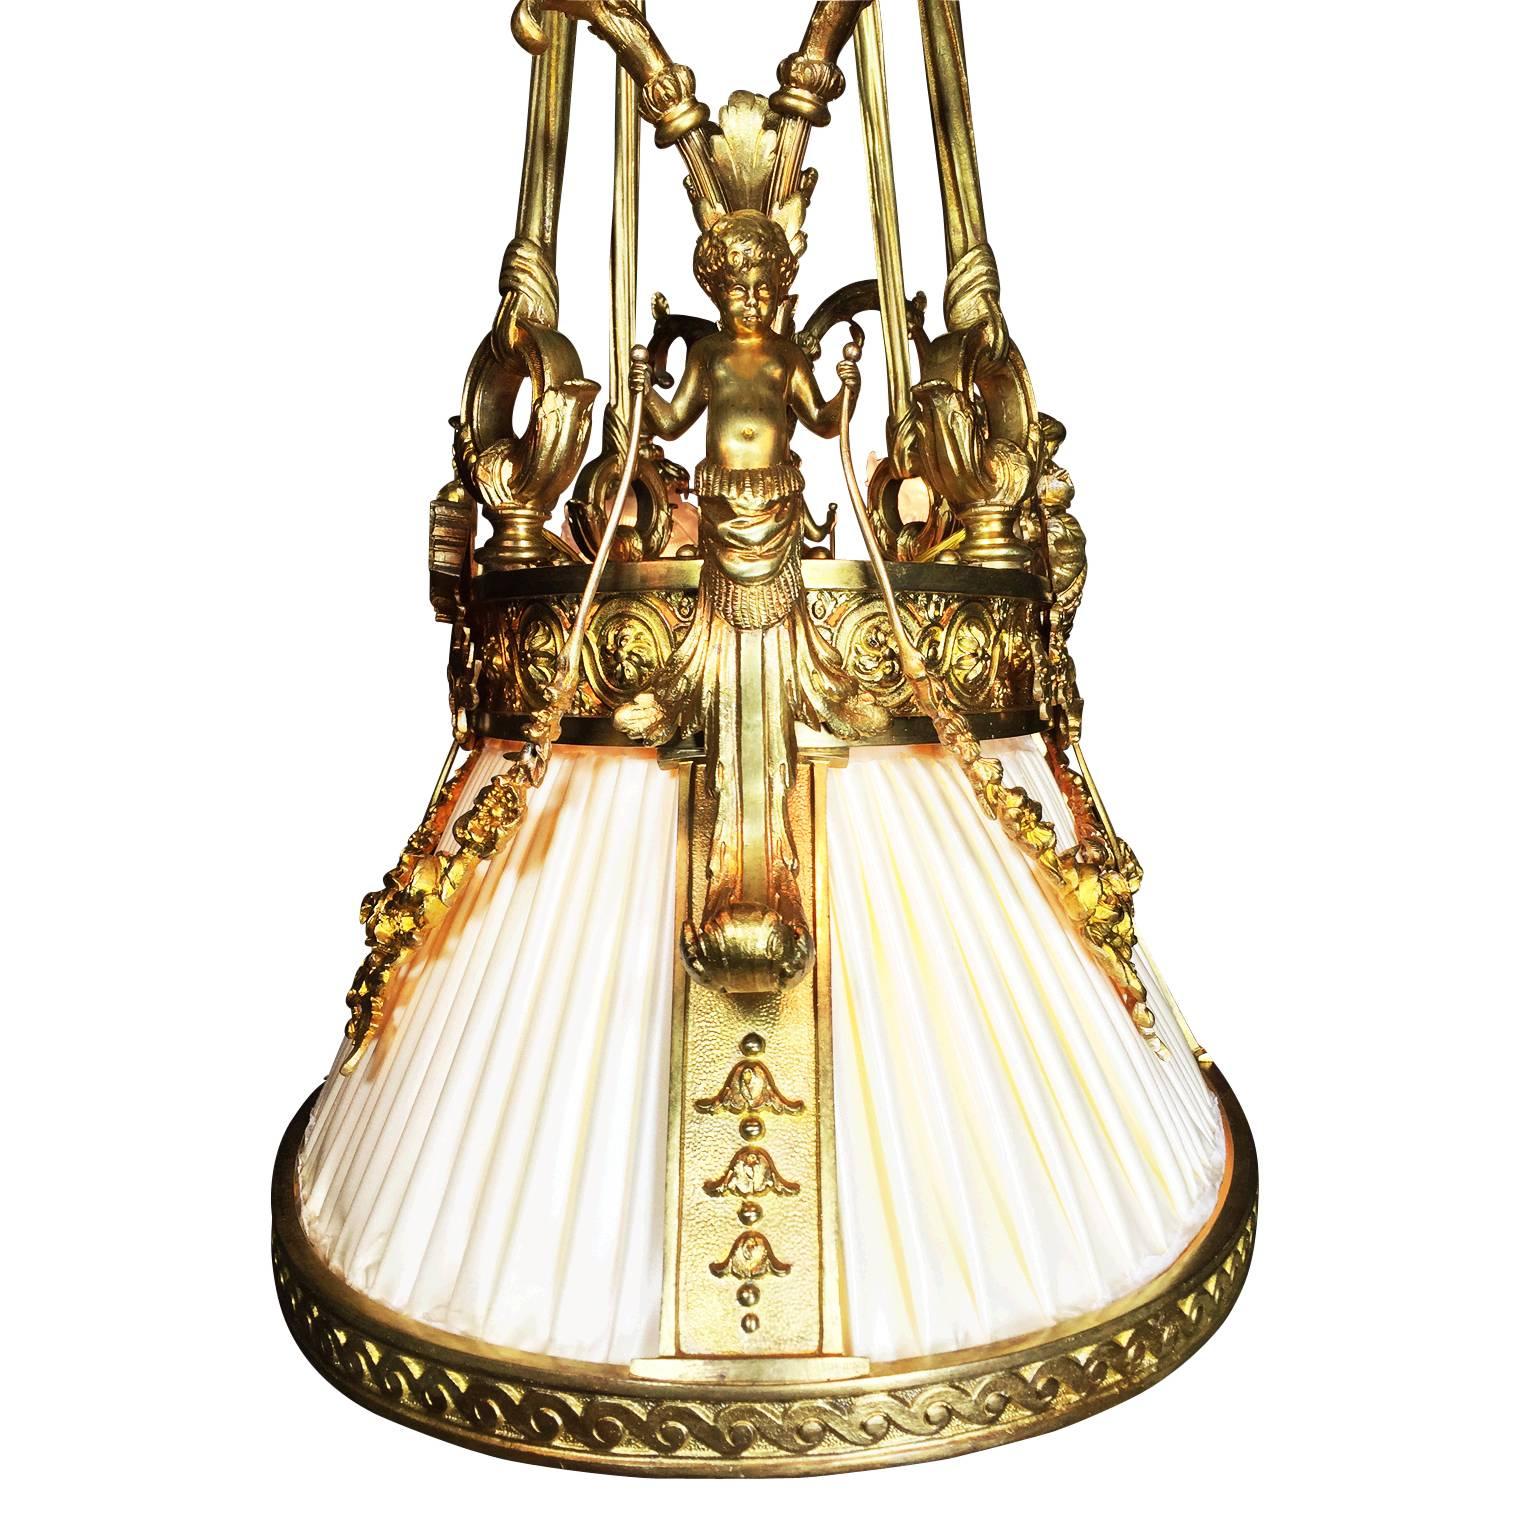 Early 20th Century French 19th-20th Century Belle Epoque Gilt-Bronze Figural Nine-Light Chandelier